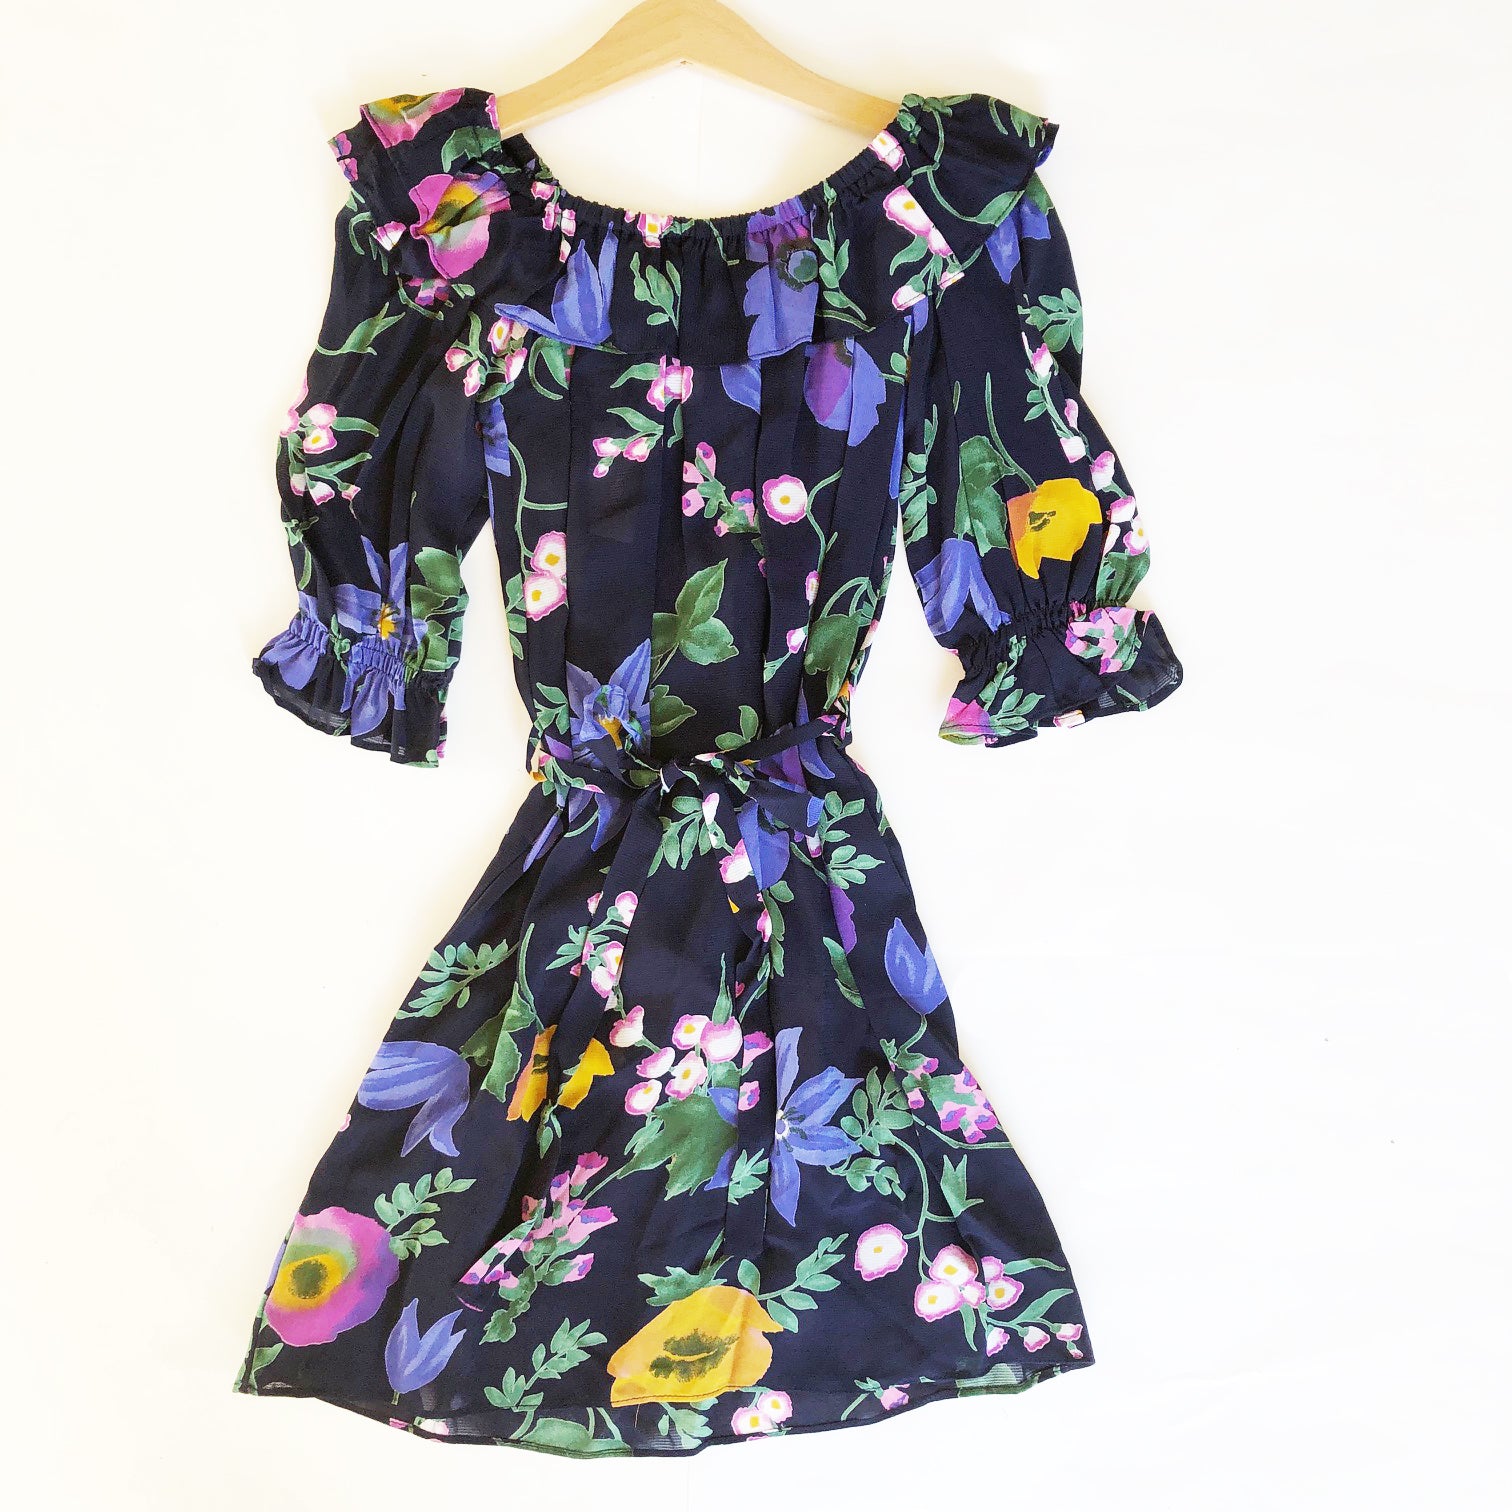 Isla Re-purposed Puff Sleeve Dress in Floral Georgette size 6